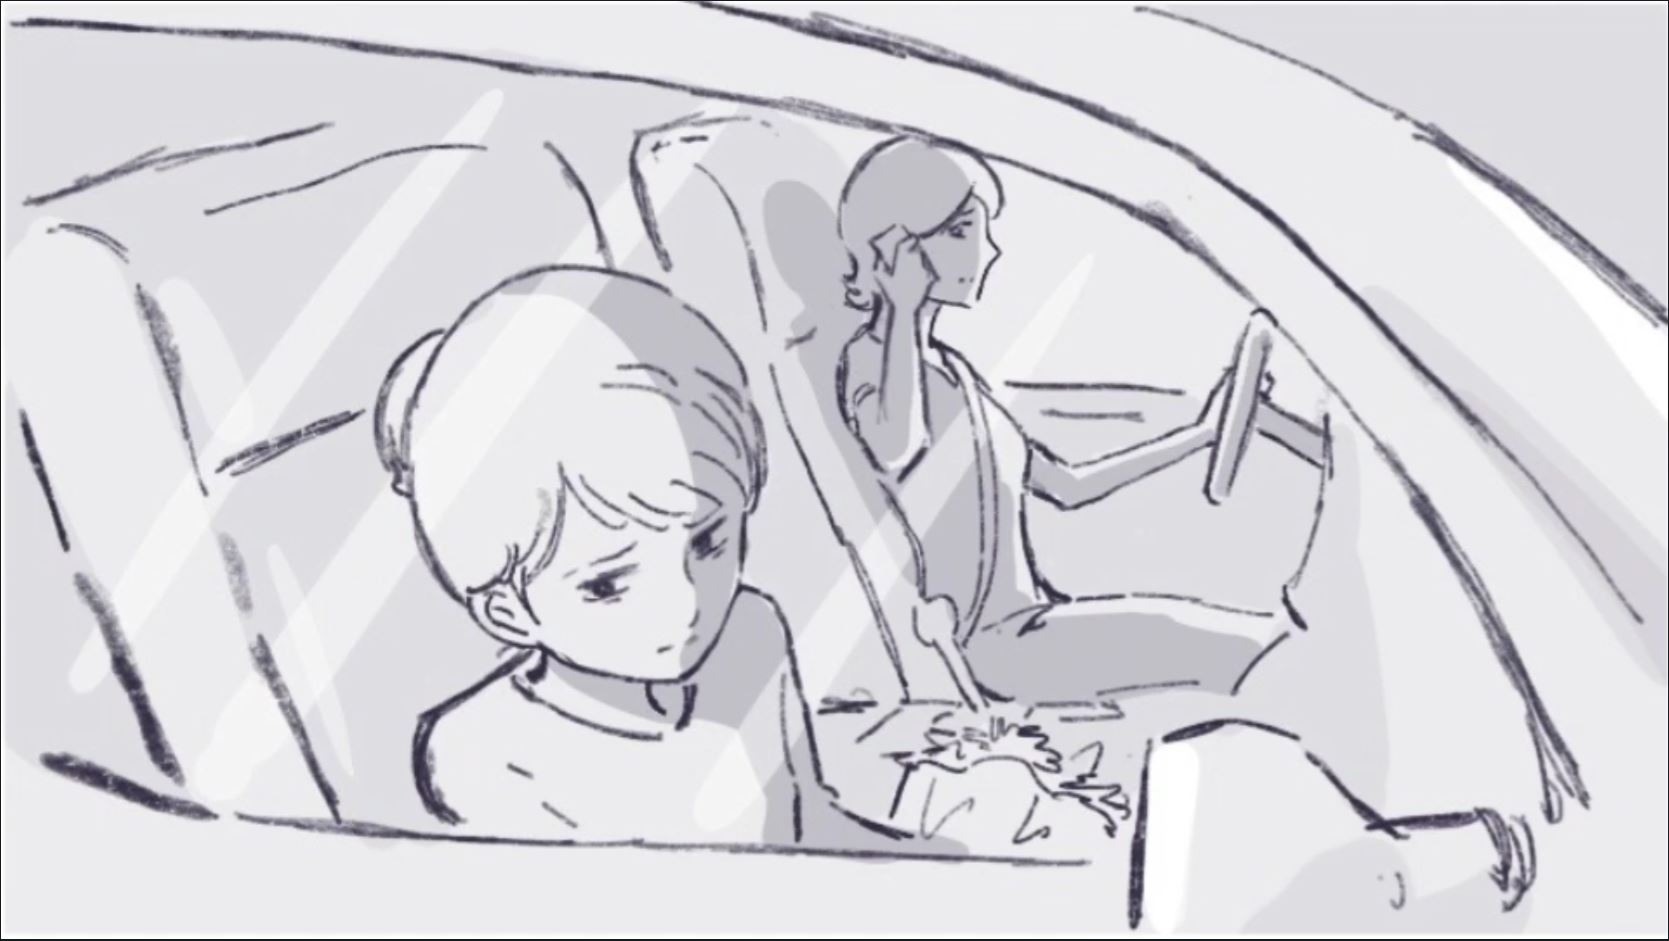 BeThere_0040_0010_Storyboard